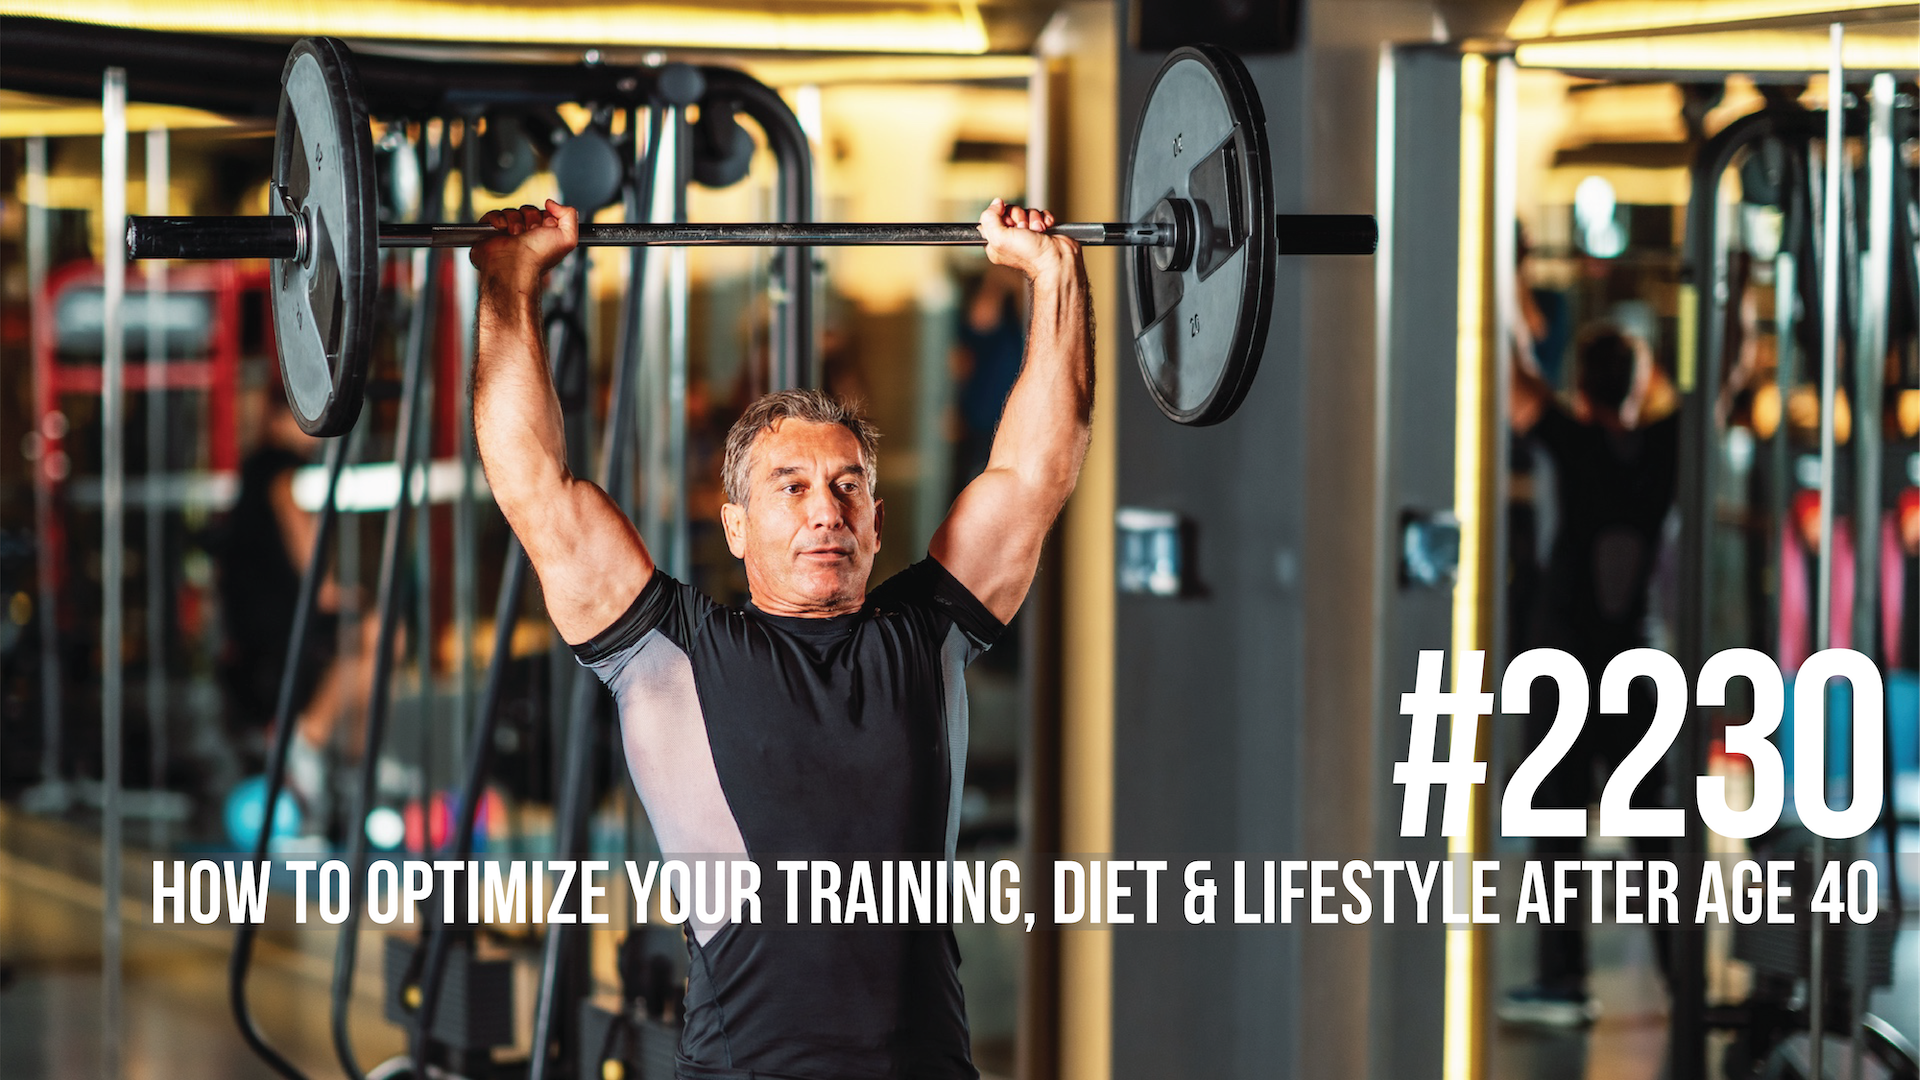 2230: How to Optimize Your Training, Diet & Lifestyle After Age 40